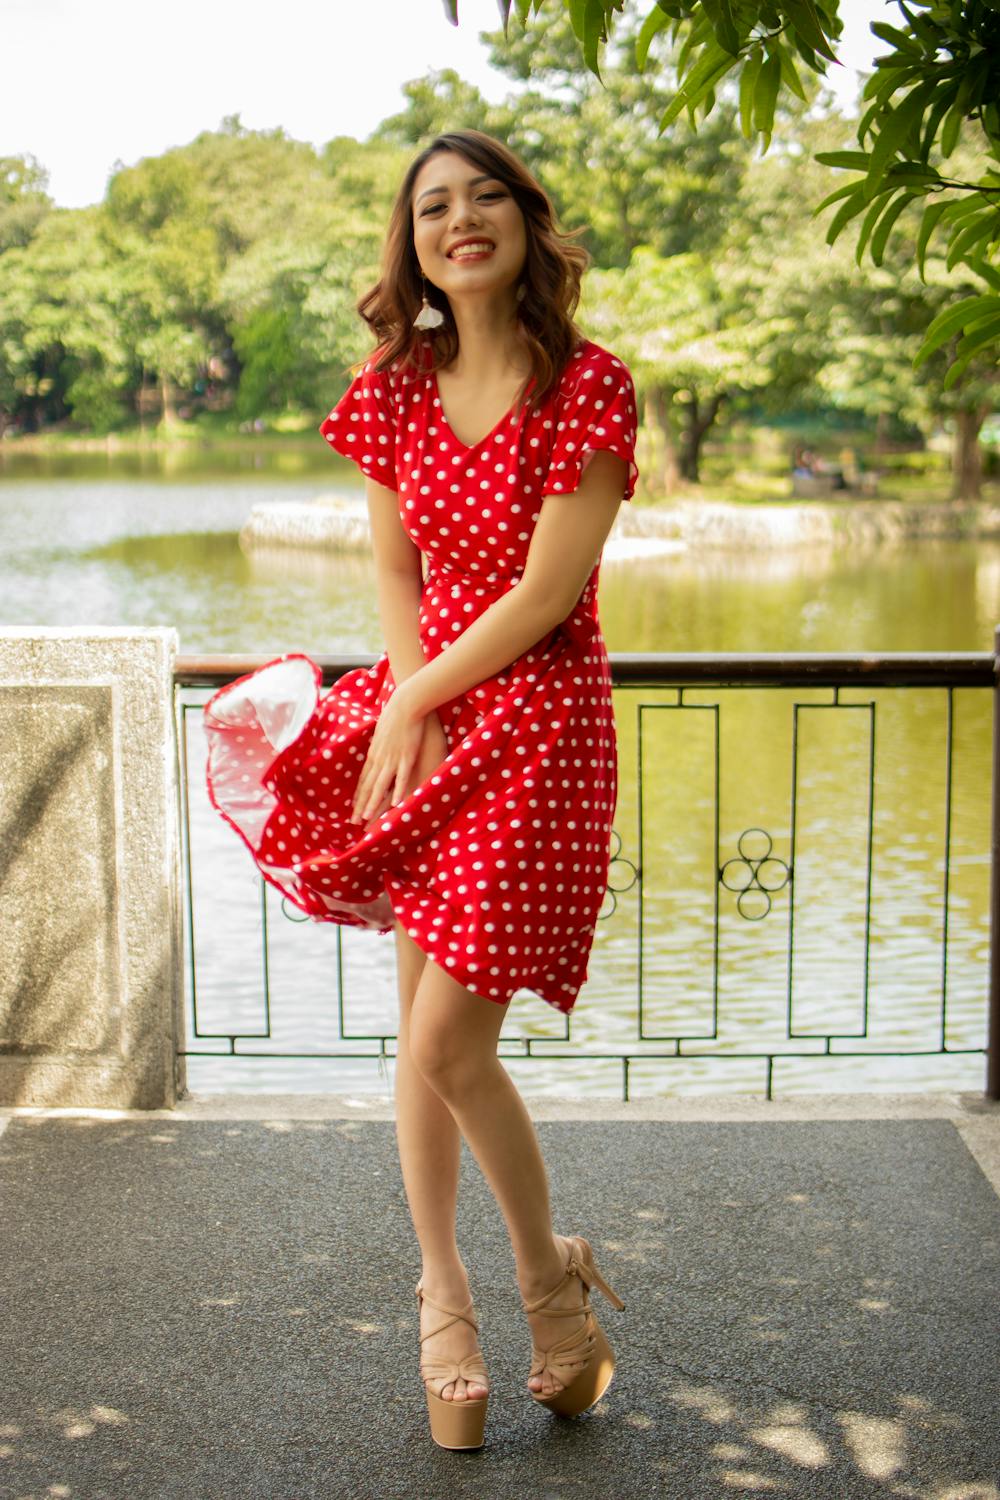 smiling-woman-in-red-and-white-polka-dot-dress-free-stock-photo